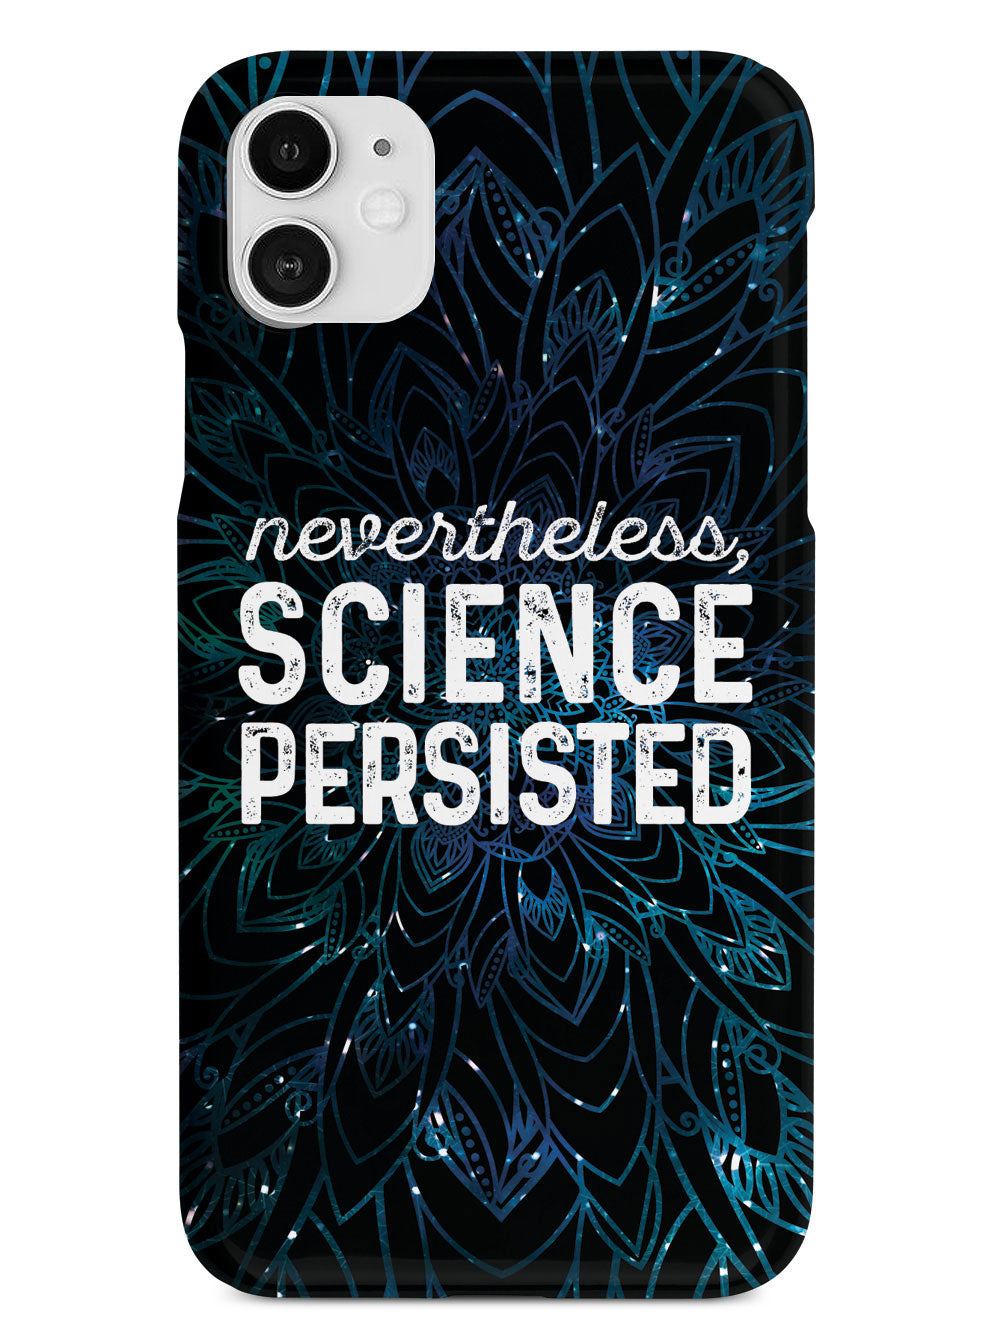 Nevertheless, Science Persisted - Black Case